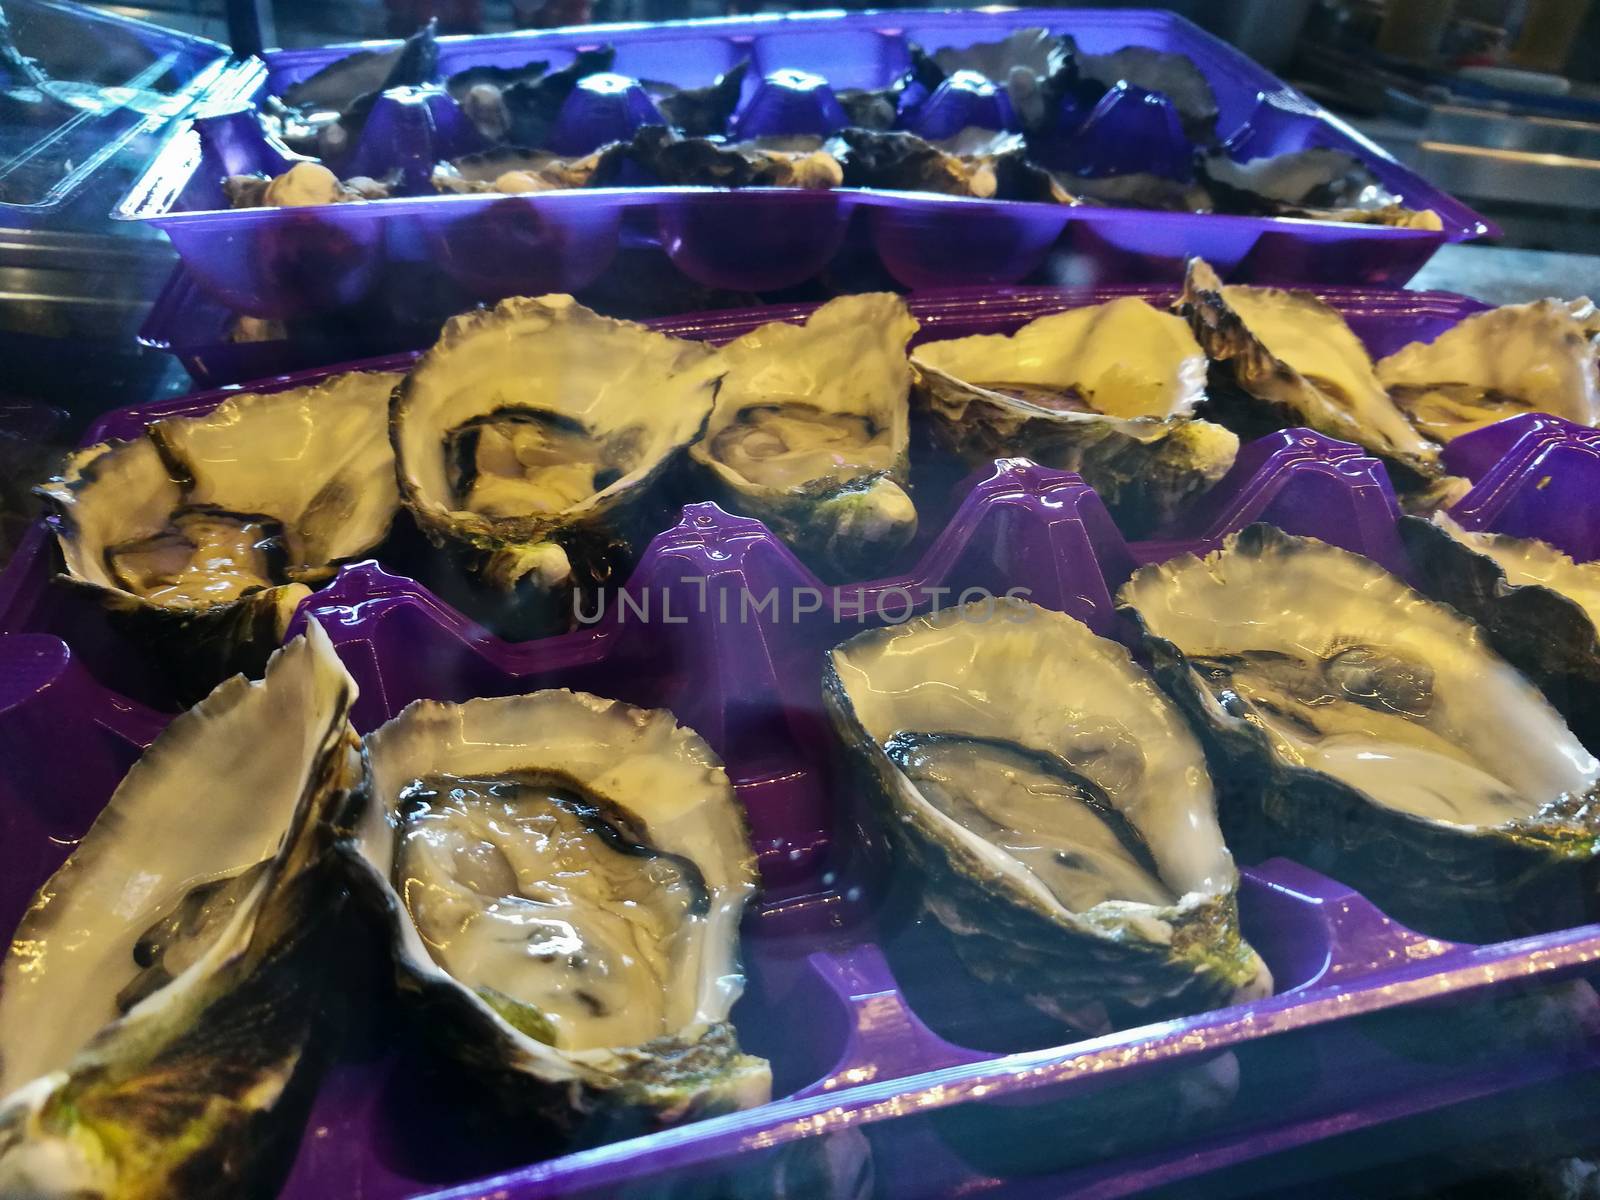 Sydney rock oysters ready to eat on a plate